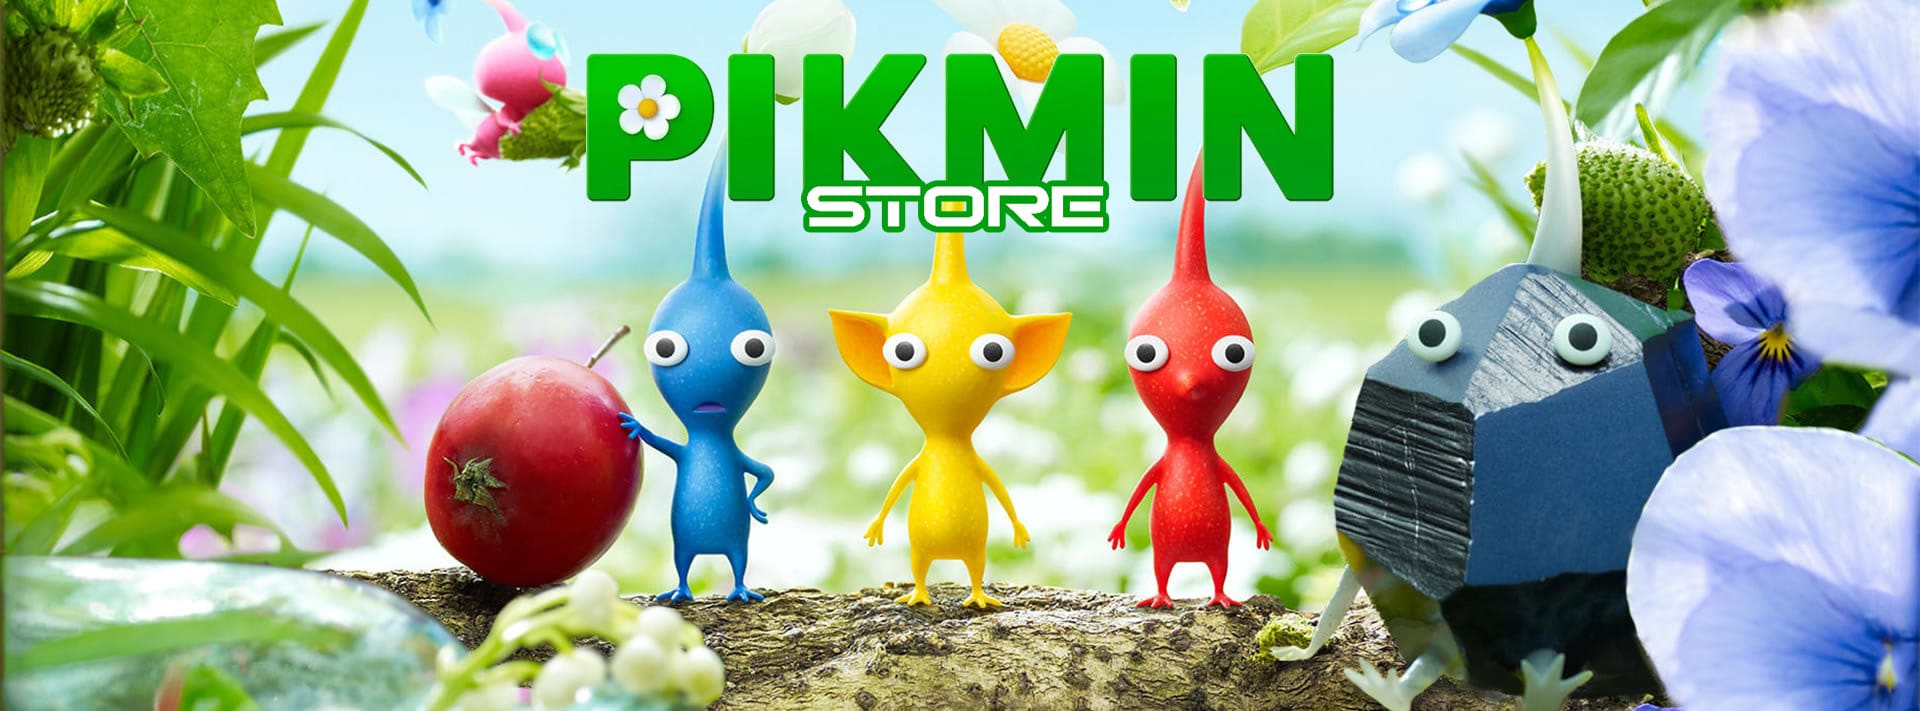 Pikmin Store Banner